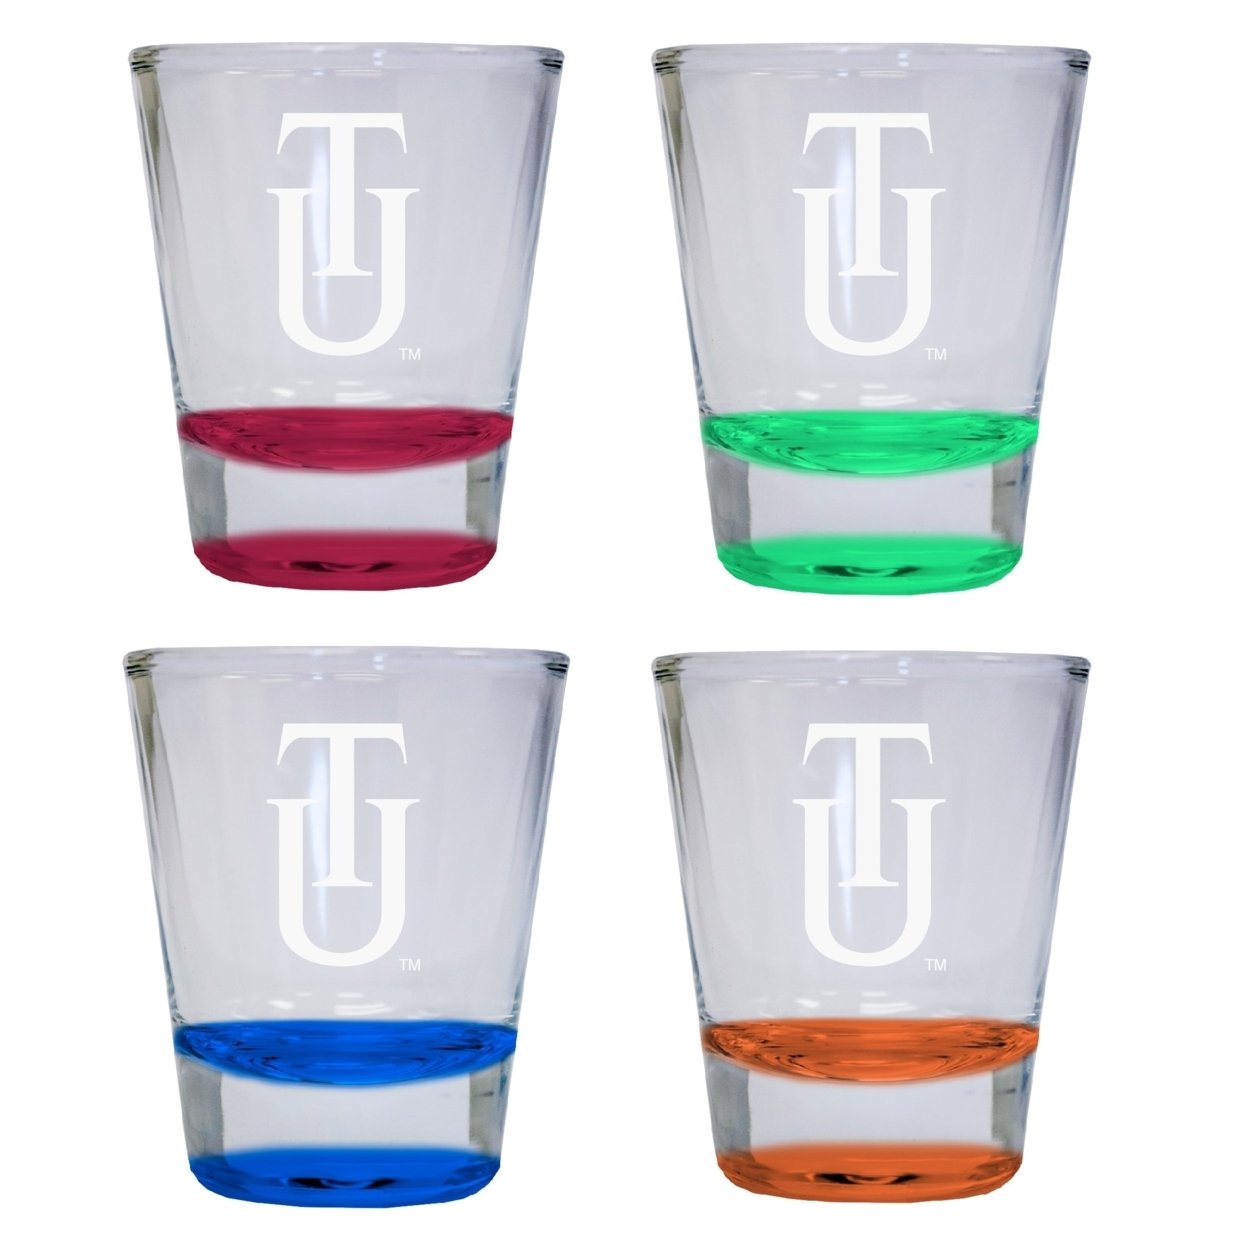 4-Pack Tuskegee University Etched Round Shot Glass 2 Oz